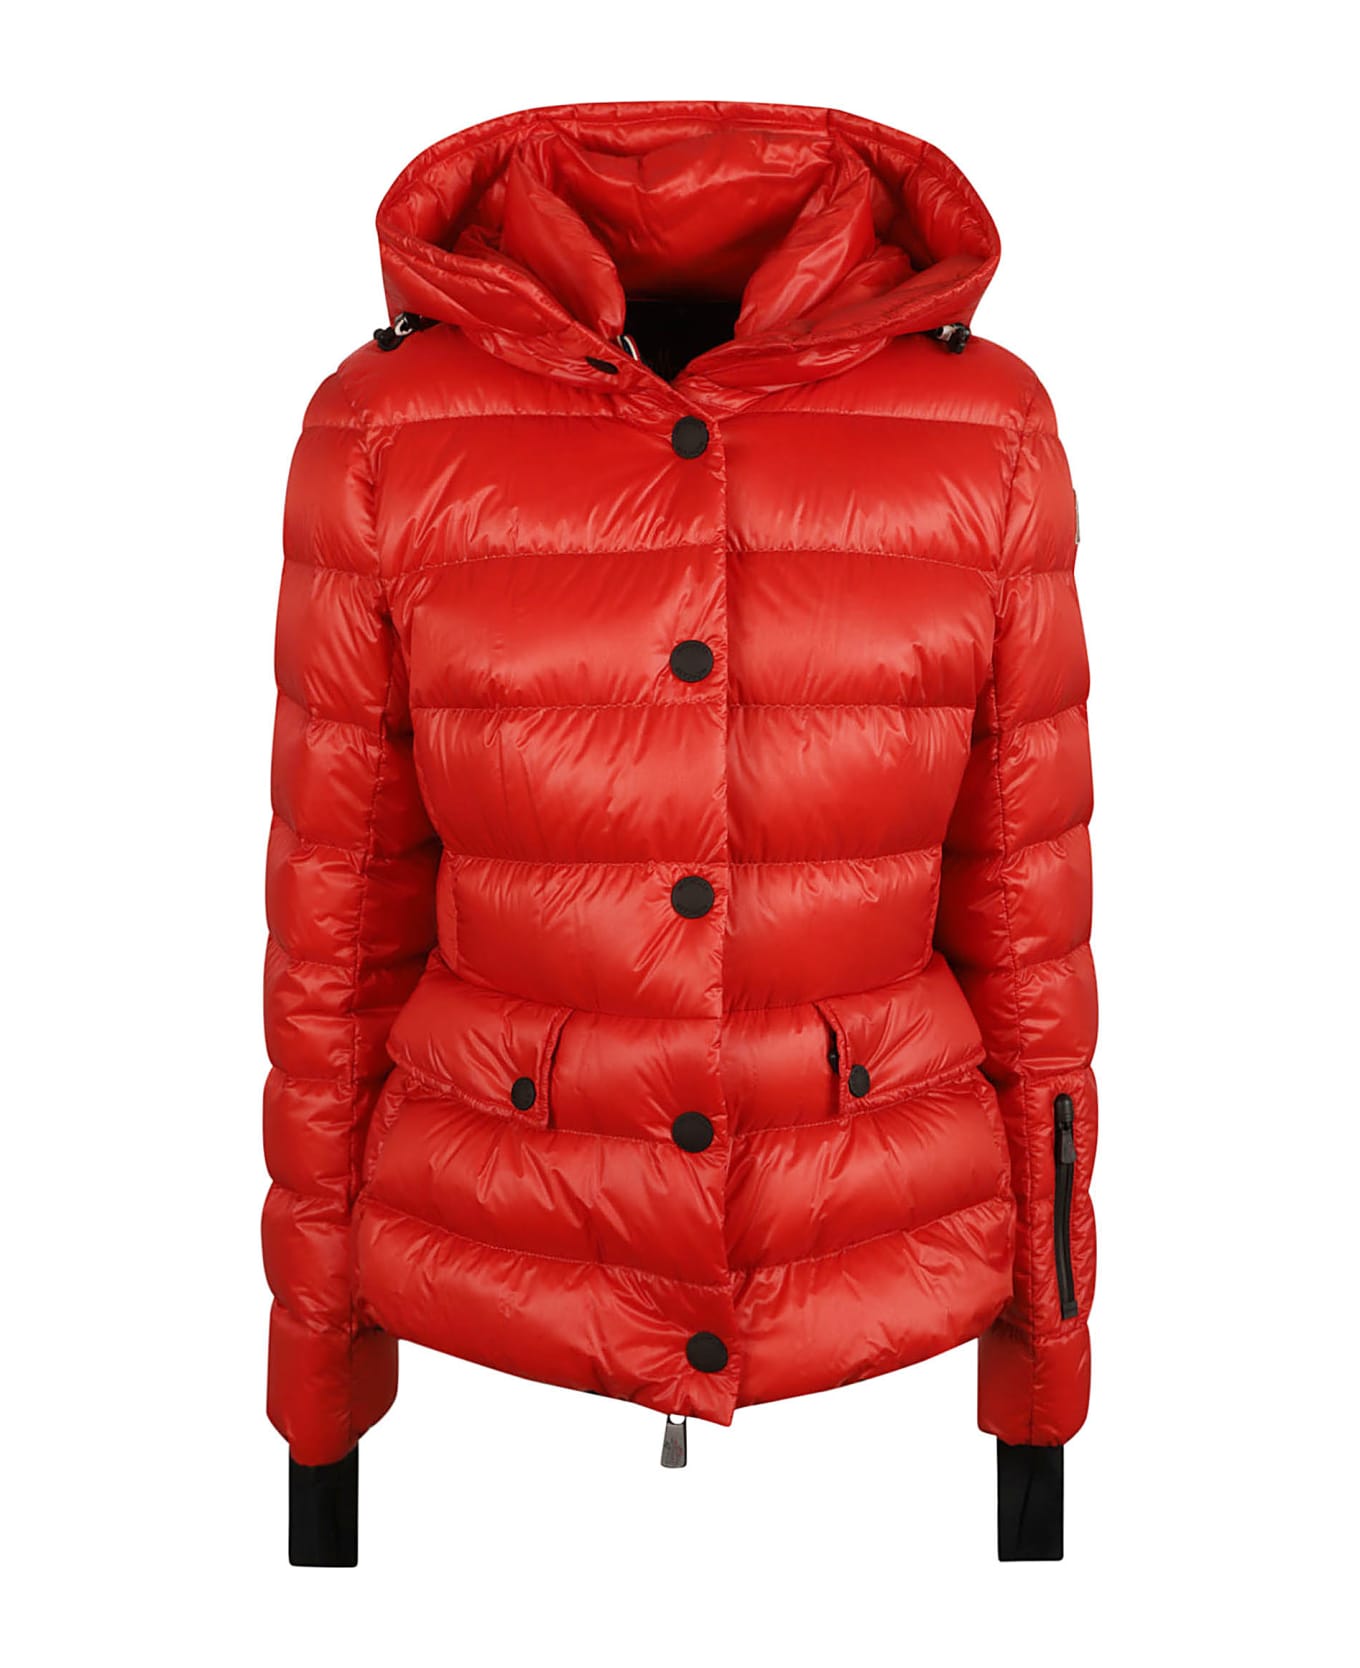 Moncler Grenoble Armoniques Padded Jacket - Red ダウンジャケット